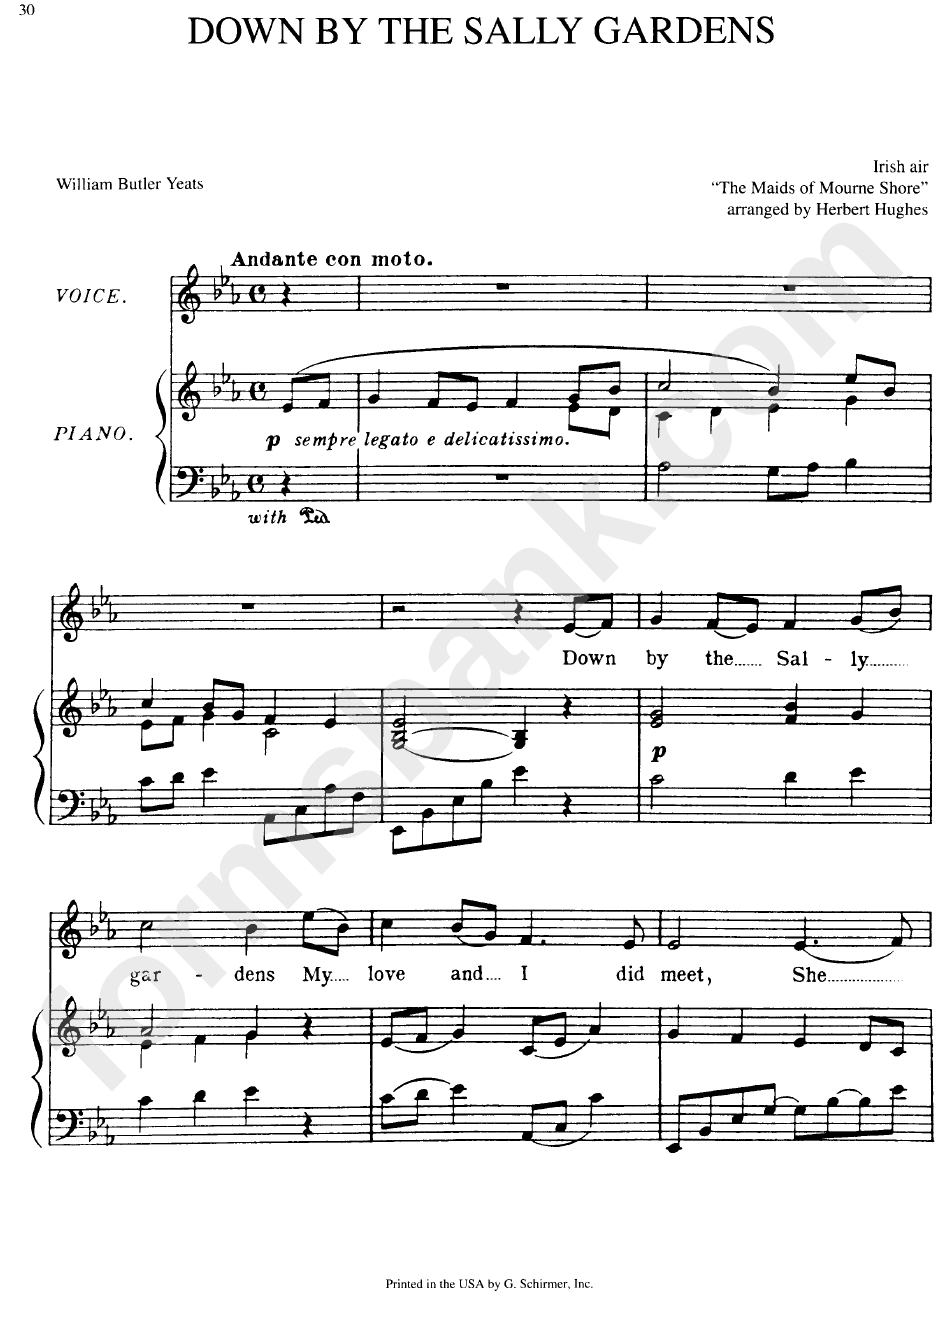 Down By The Sally Gardens - William Butler Yeats (Piano Sheet Music)